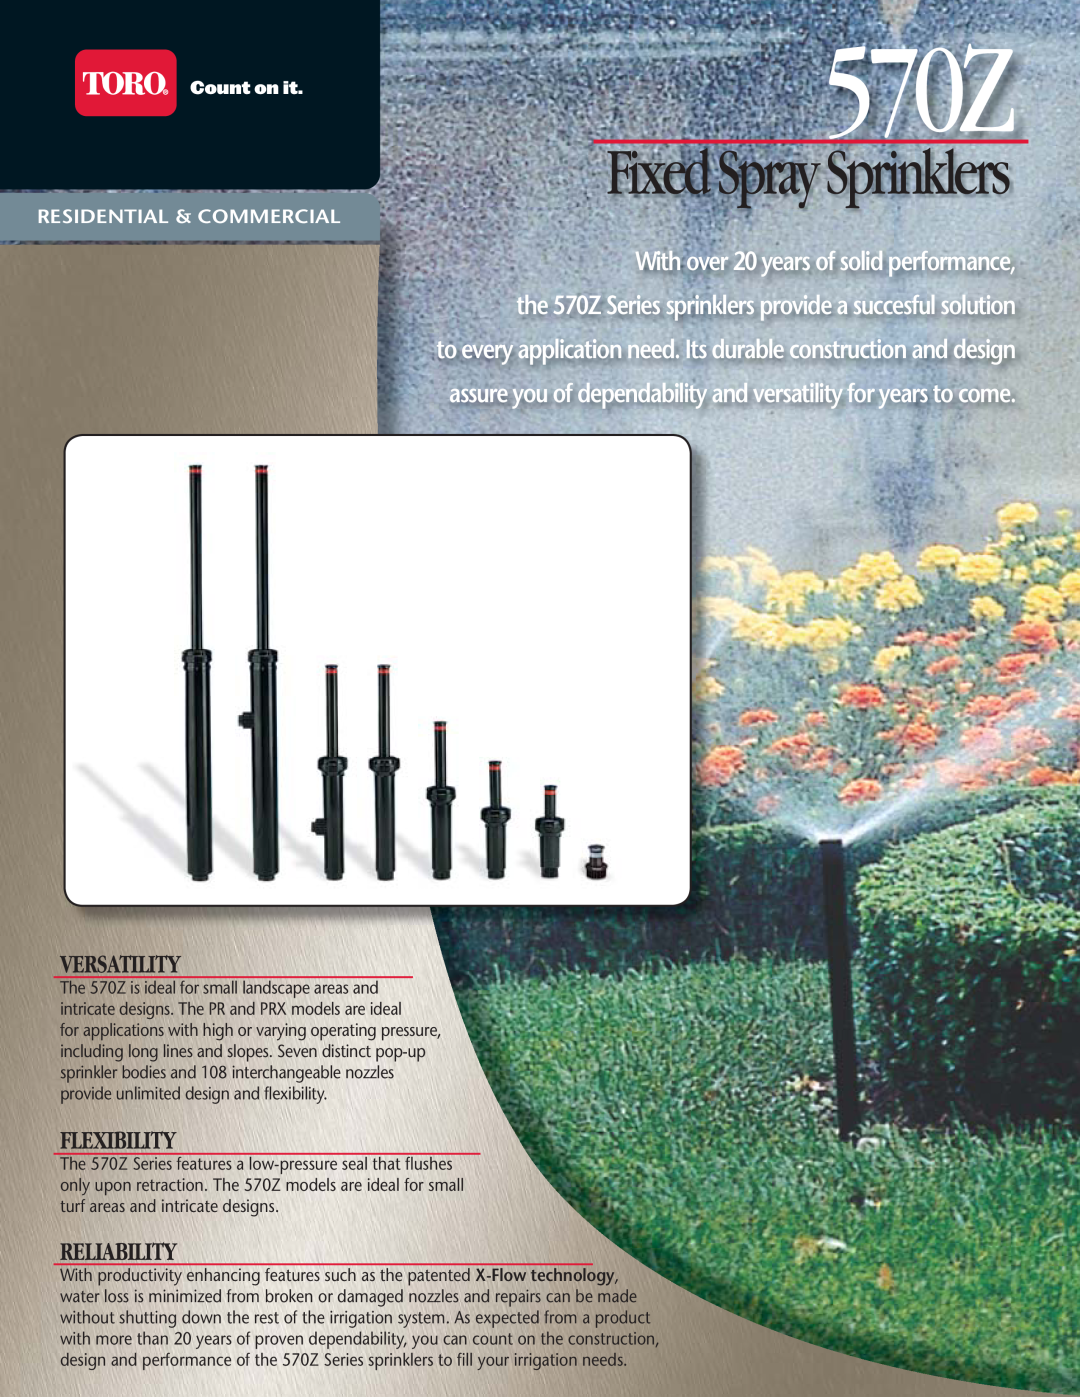 Toro 570Z manual Fixed Spray Sprinklers, assure you of dependability and versatility for years to come, Versatility 